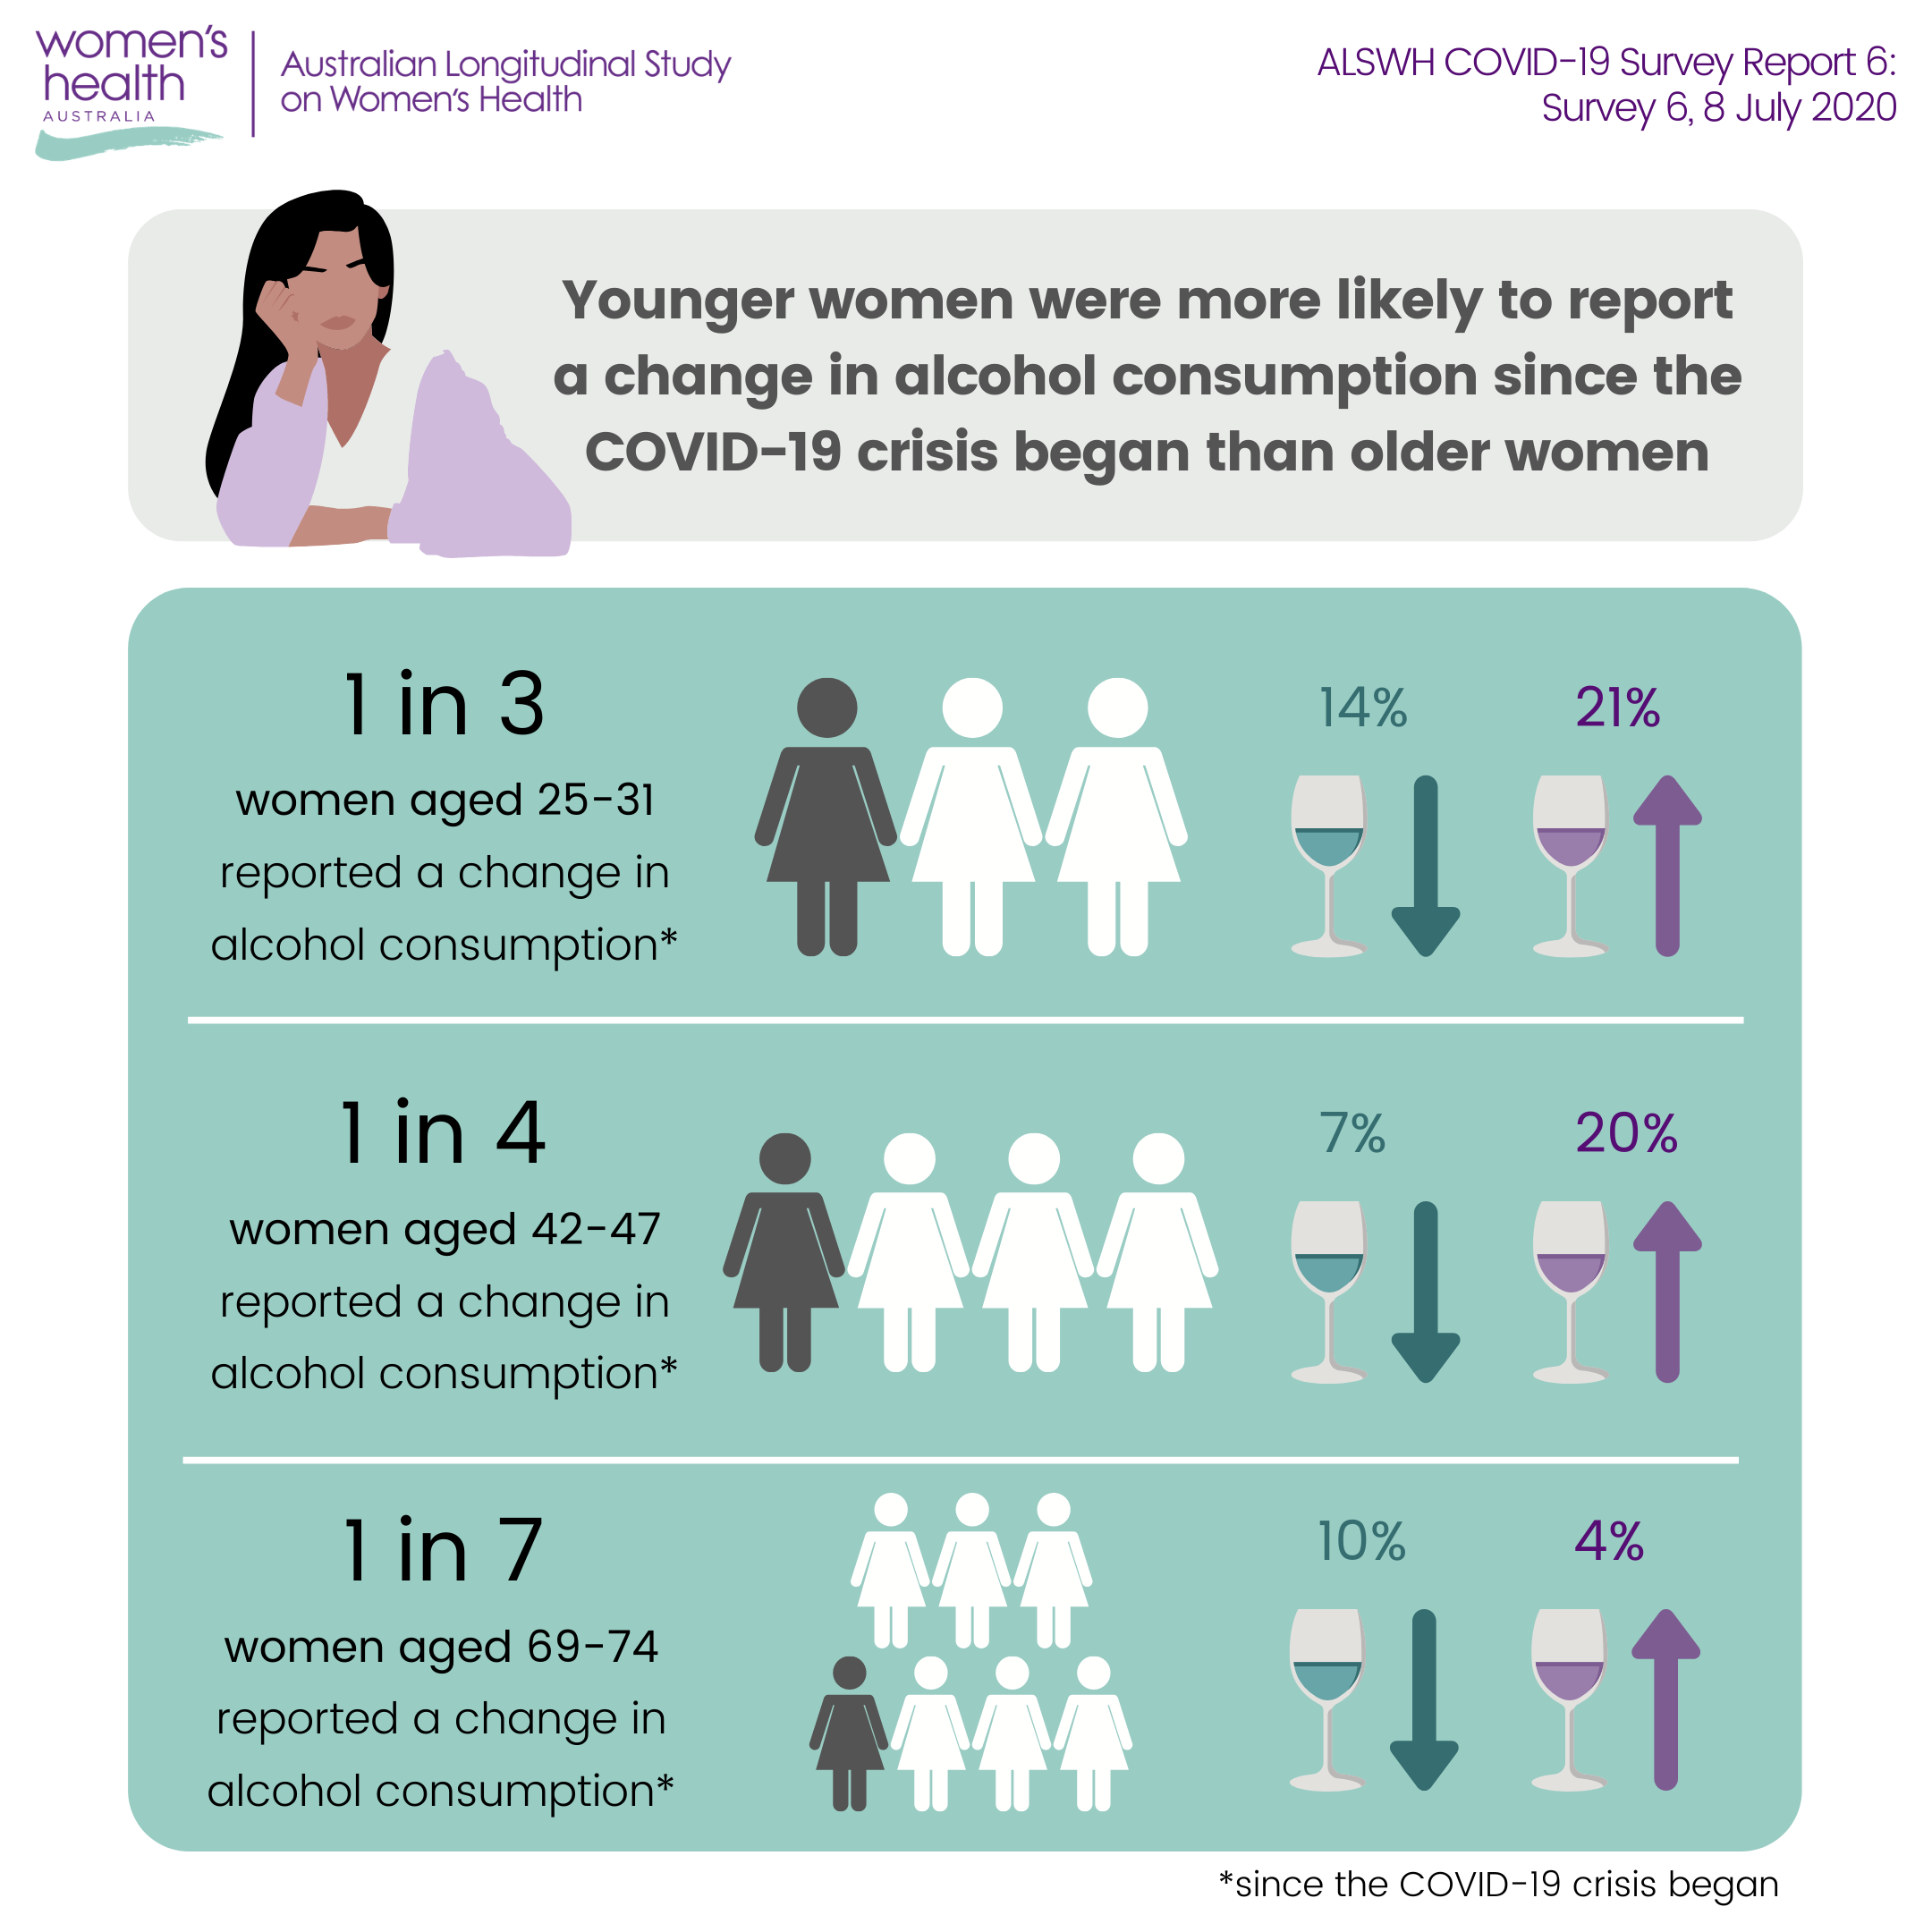 Younger women were more likely to report a change in alcohol consumption since the covid-19 crisis began than older women. 1 in 3 women aged 25-31 reported a change (14% decreased, 21% increased). 1 in 4 women aged 42-47 reported a change (7% decreased, 20% increased). 1 in 7 women aged 69-74 repoted a change (10% decreased, 4% increased).